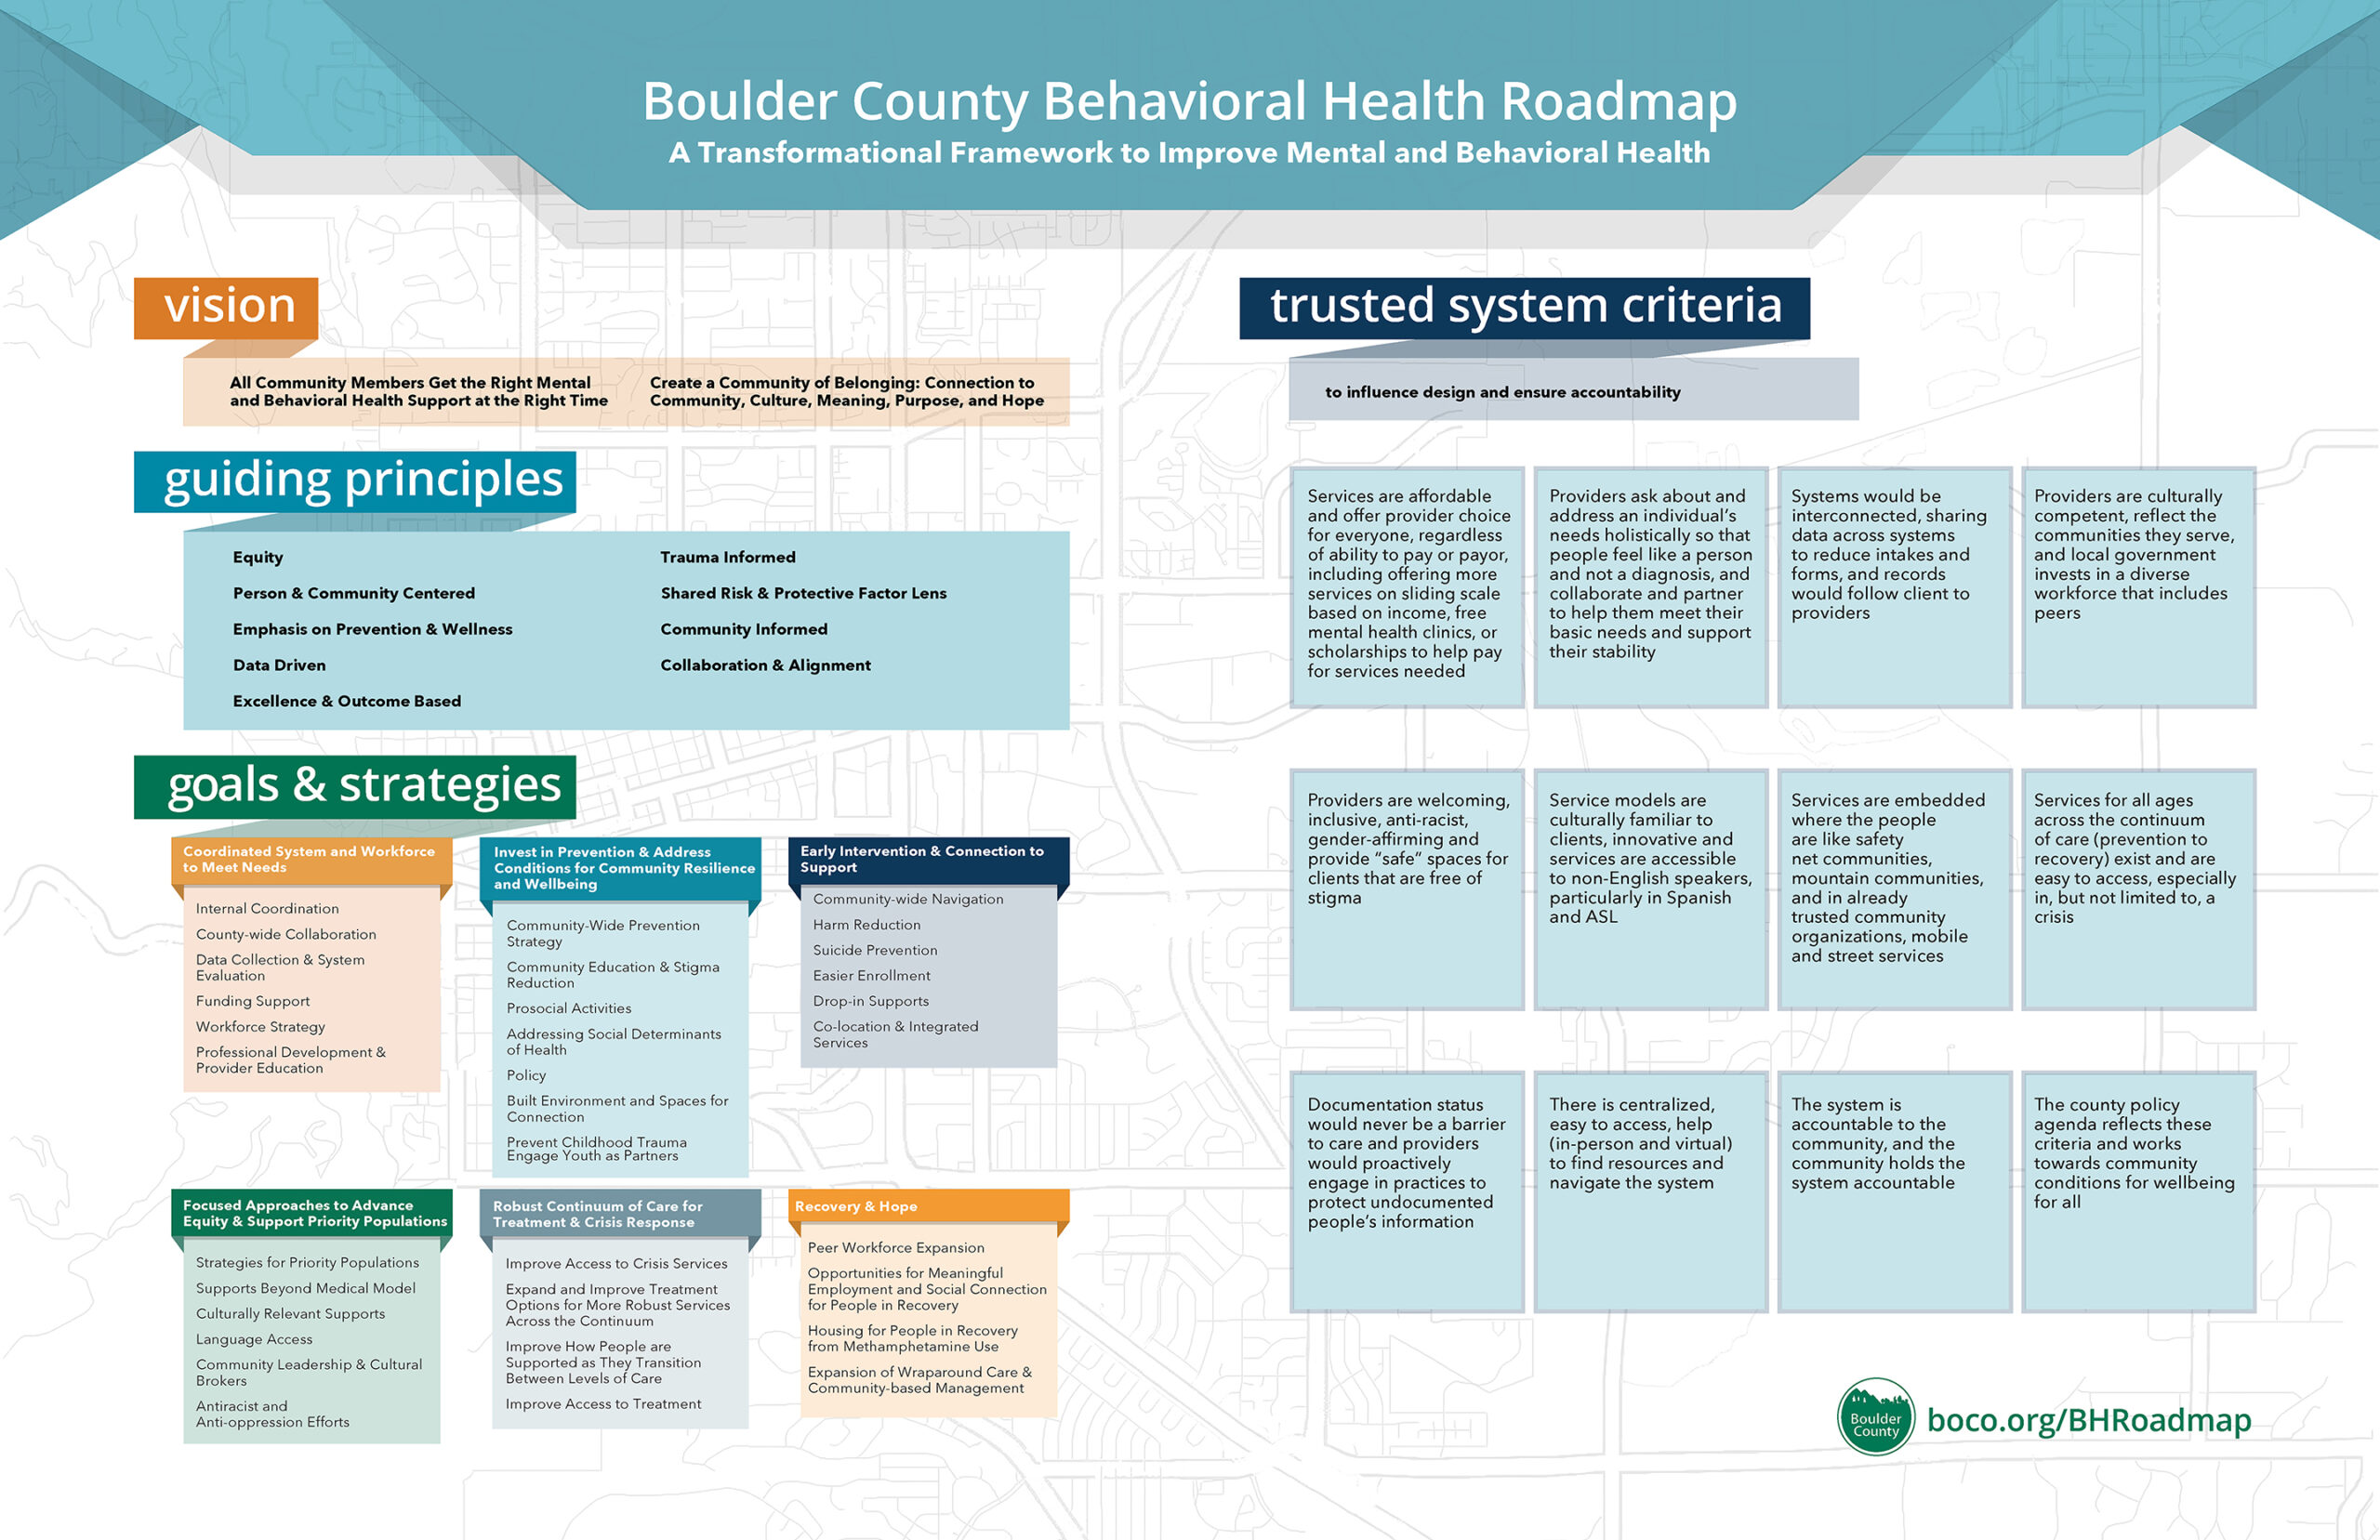 Graphic showing the Behavioral Health Framework, from vision to goals and strategies